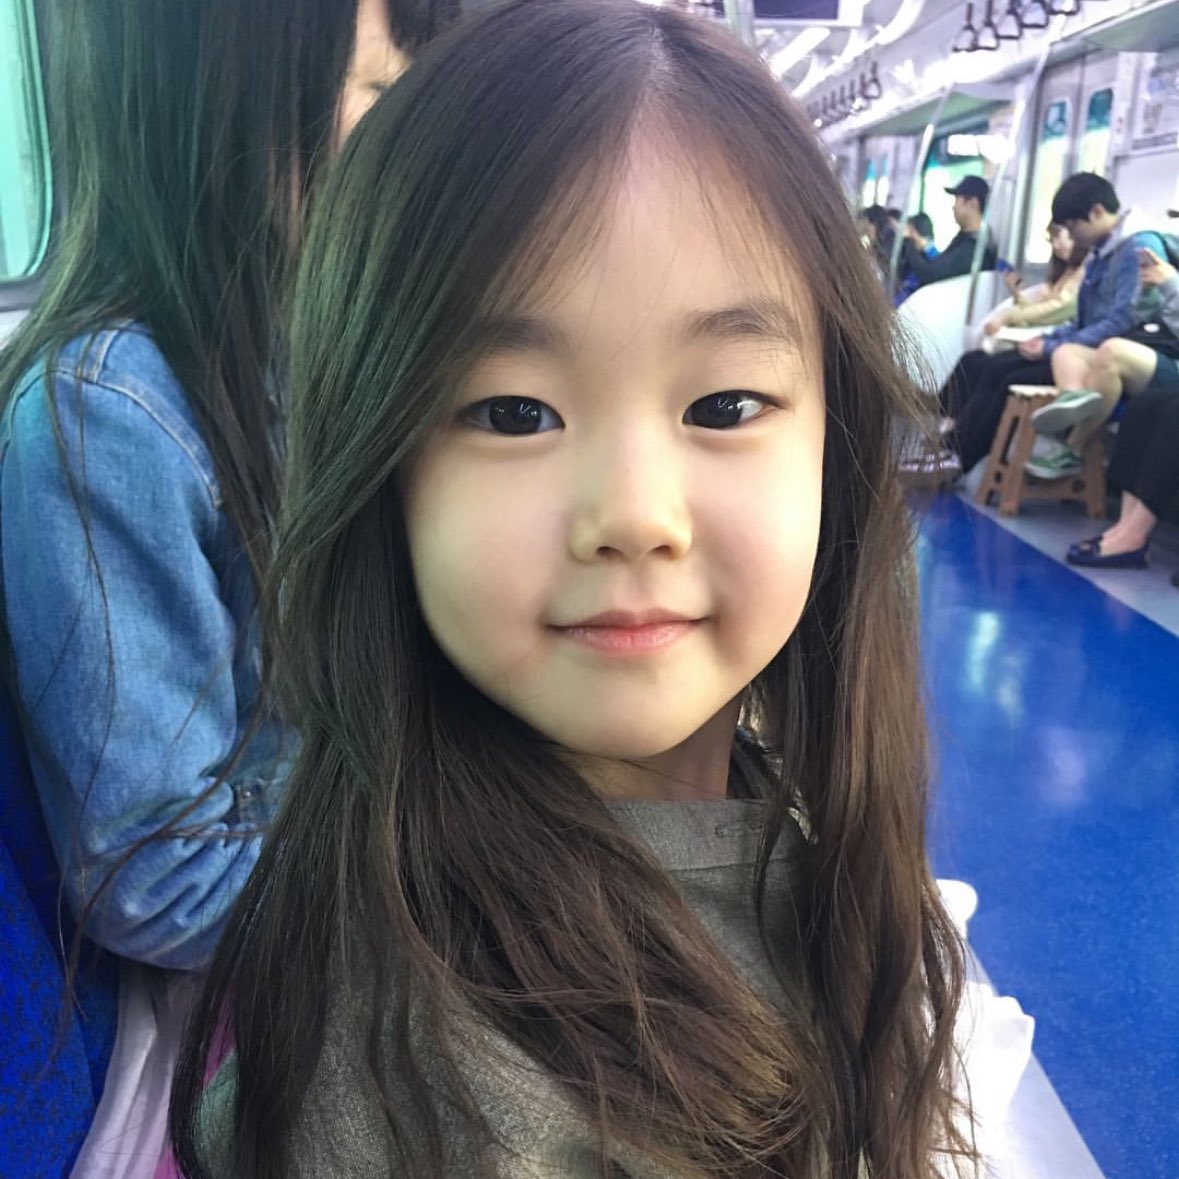 Current status of child actress Park So-yi, who has grown by leaps and bounds